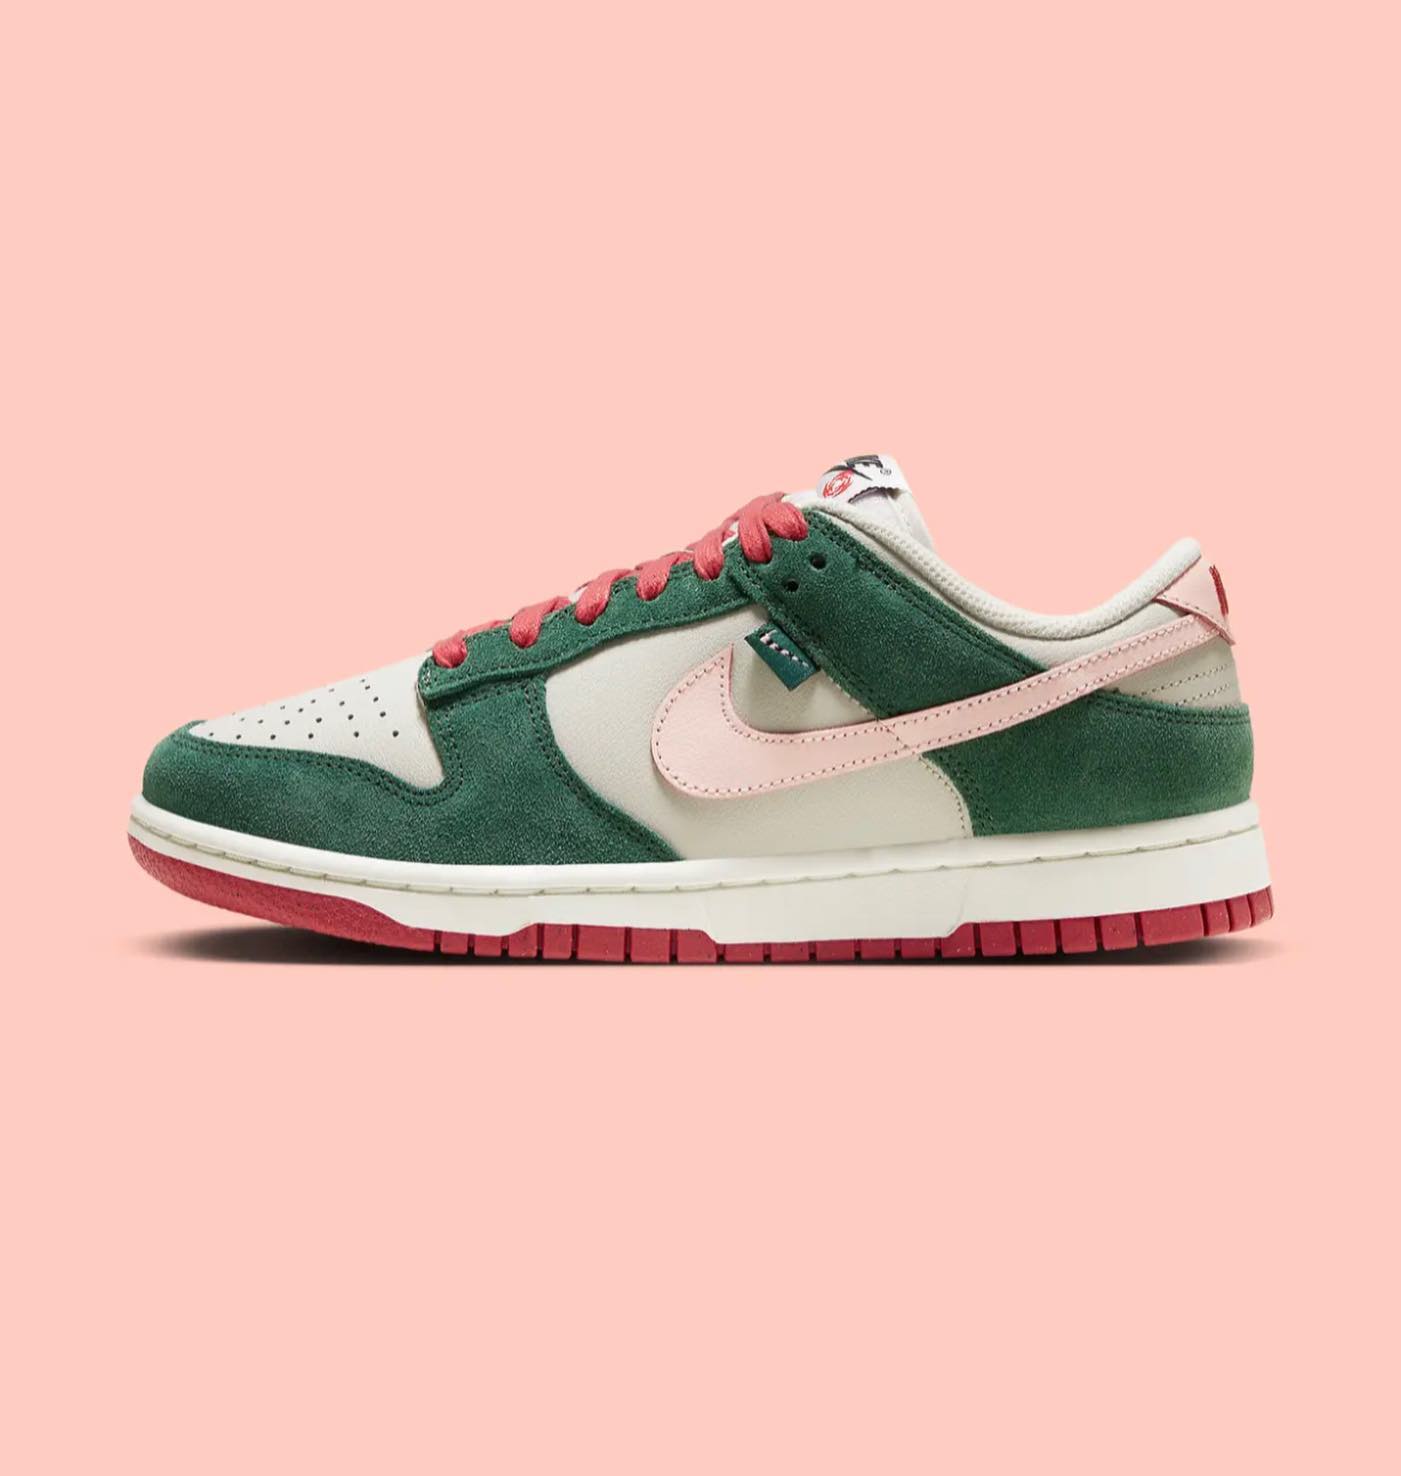 All Petals United,Nike Dunk Lo  颜值不输联名！全新 Nike Dunk Low 实物曝光！